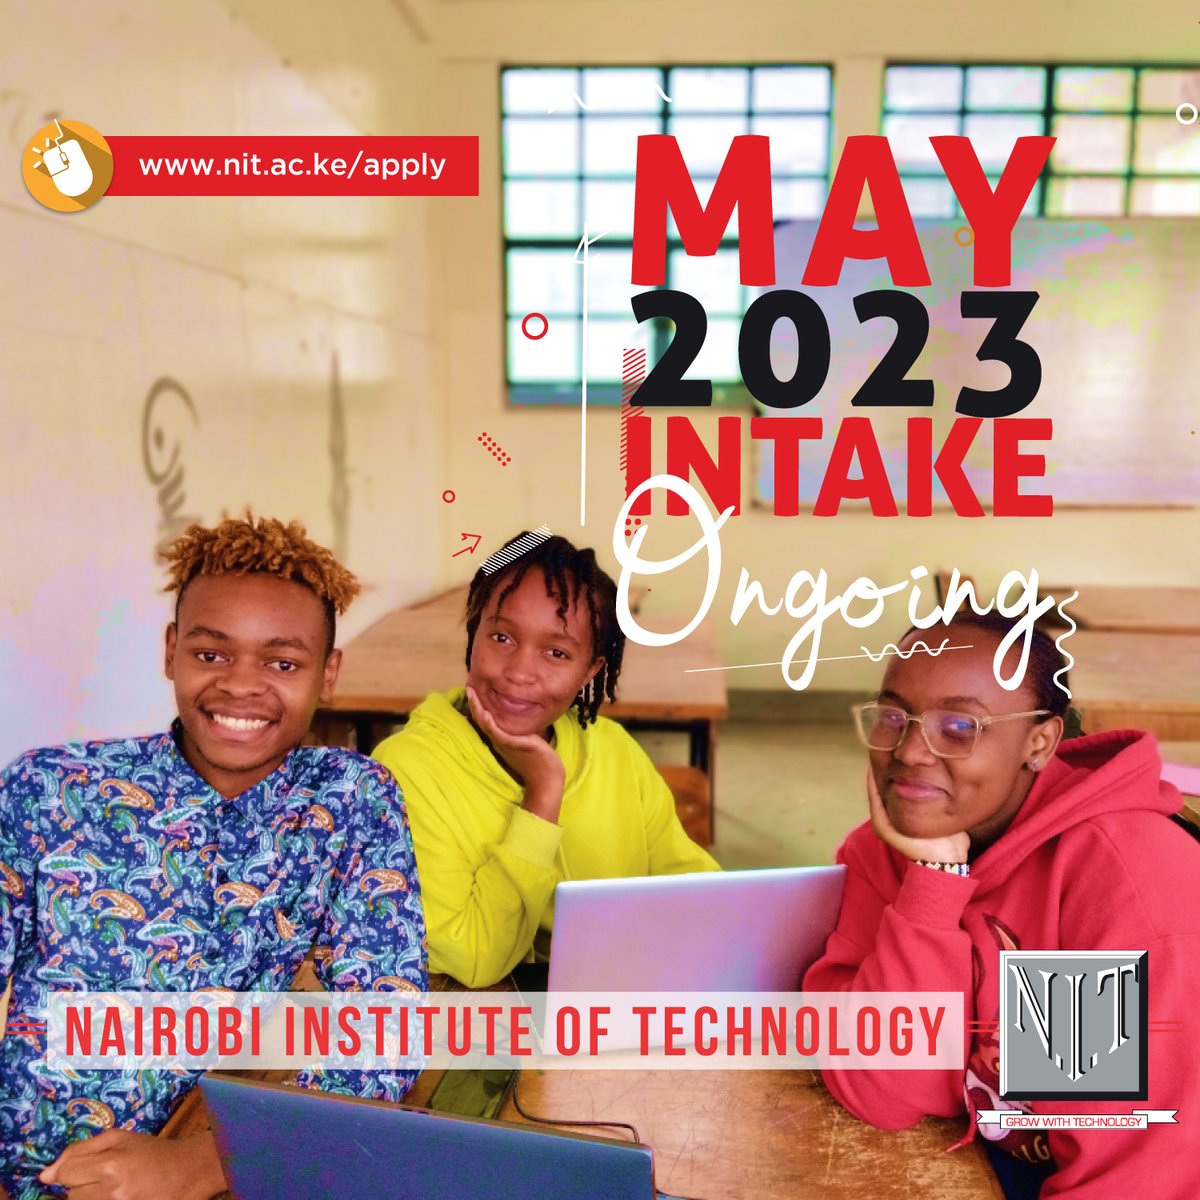 Have you heard? 👂
We are accepting applications for May 2023 intake. You DO NOT have to wait for May to apply. 

Apply NOW! 📞 0772113360/0773588187
✉️ info@nit.ac.ke
🌐 nit.ac.ke

#ExperienceNIT #certificatecourses 
#diplomacourses #collegesinkenya